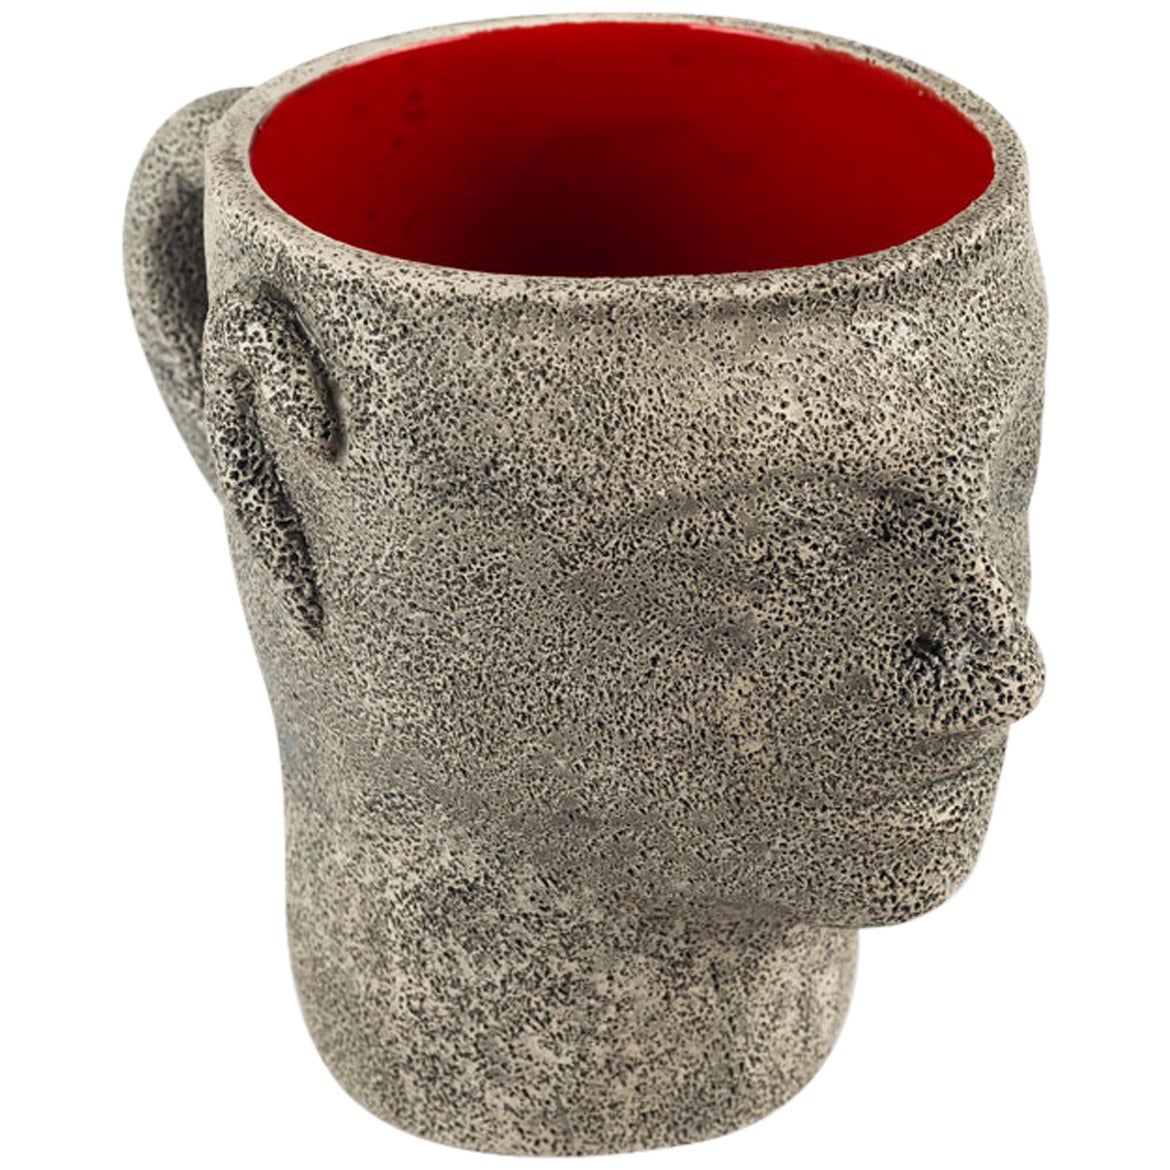 Brutalist Pottery Head Cup by Francis Triay, White Red Glaze Inside, France 1970